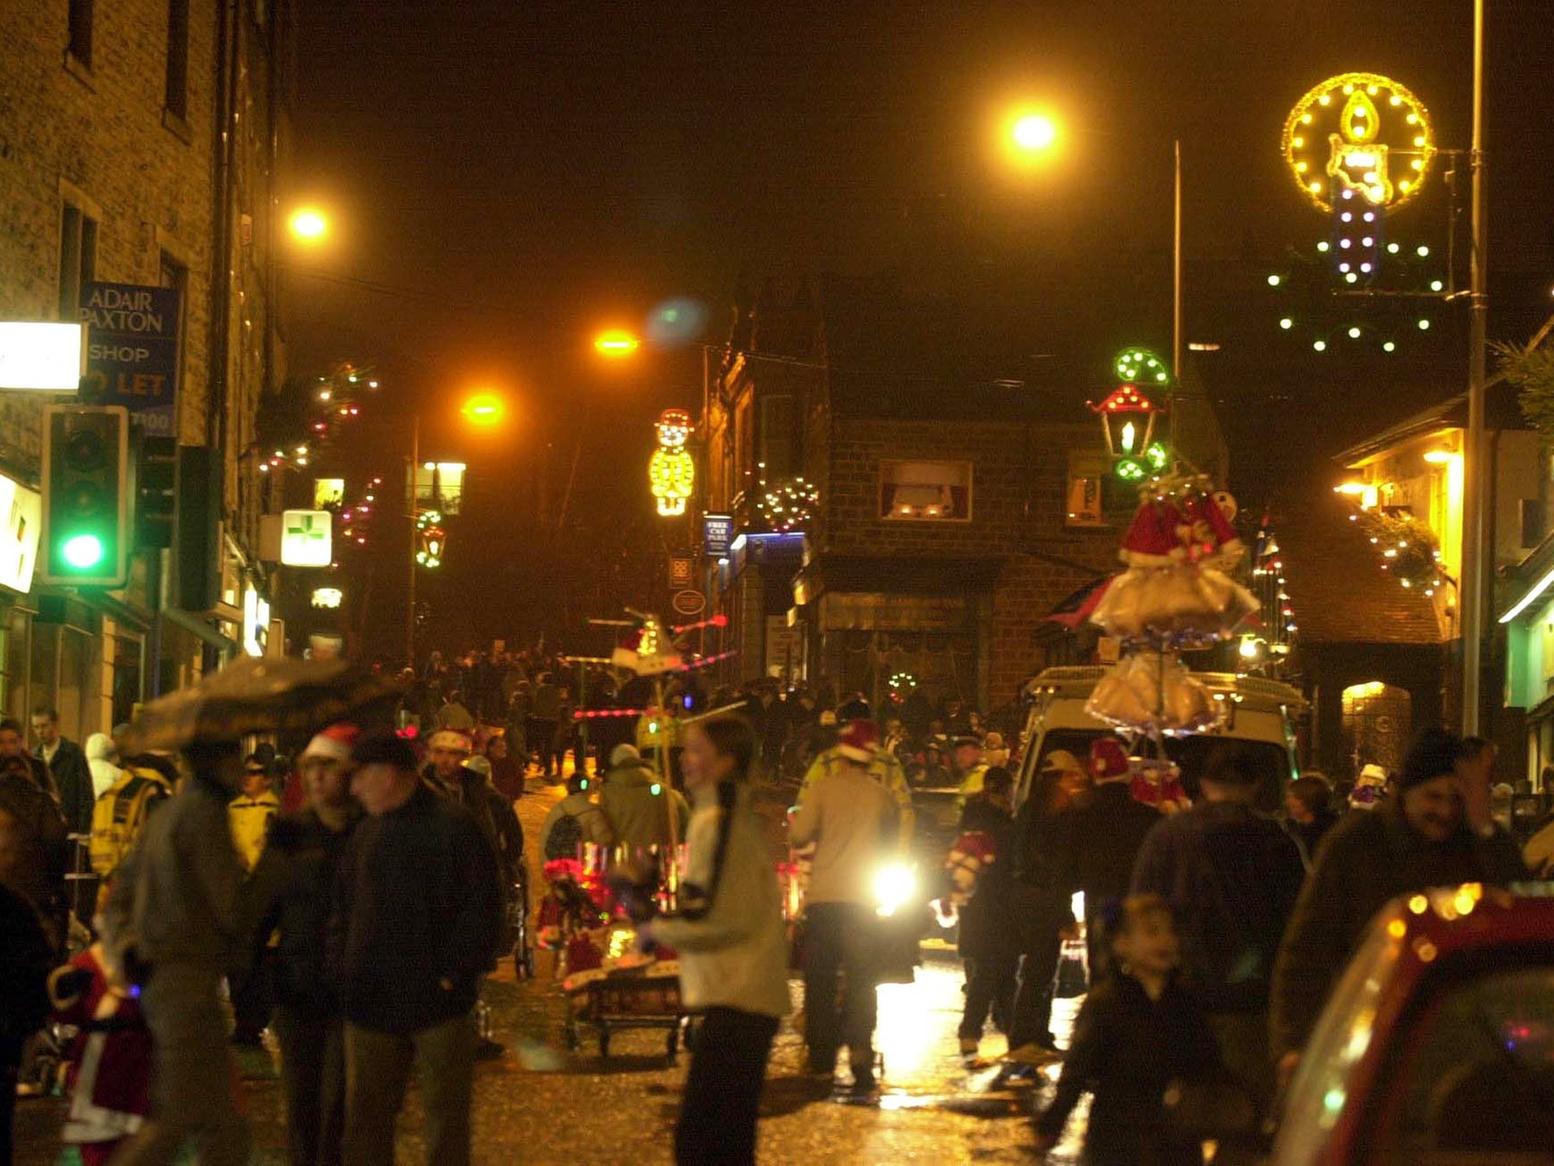 Farsley's celebration will take place on Wednesday, November 27. A parade down Old Street will arrive in time for the show to start at 6pm on Town Street. The countdown, switch on and fireworks will take place at 7pm.